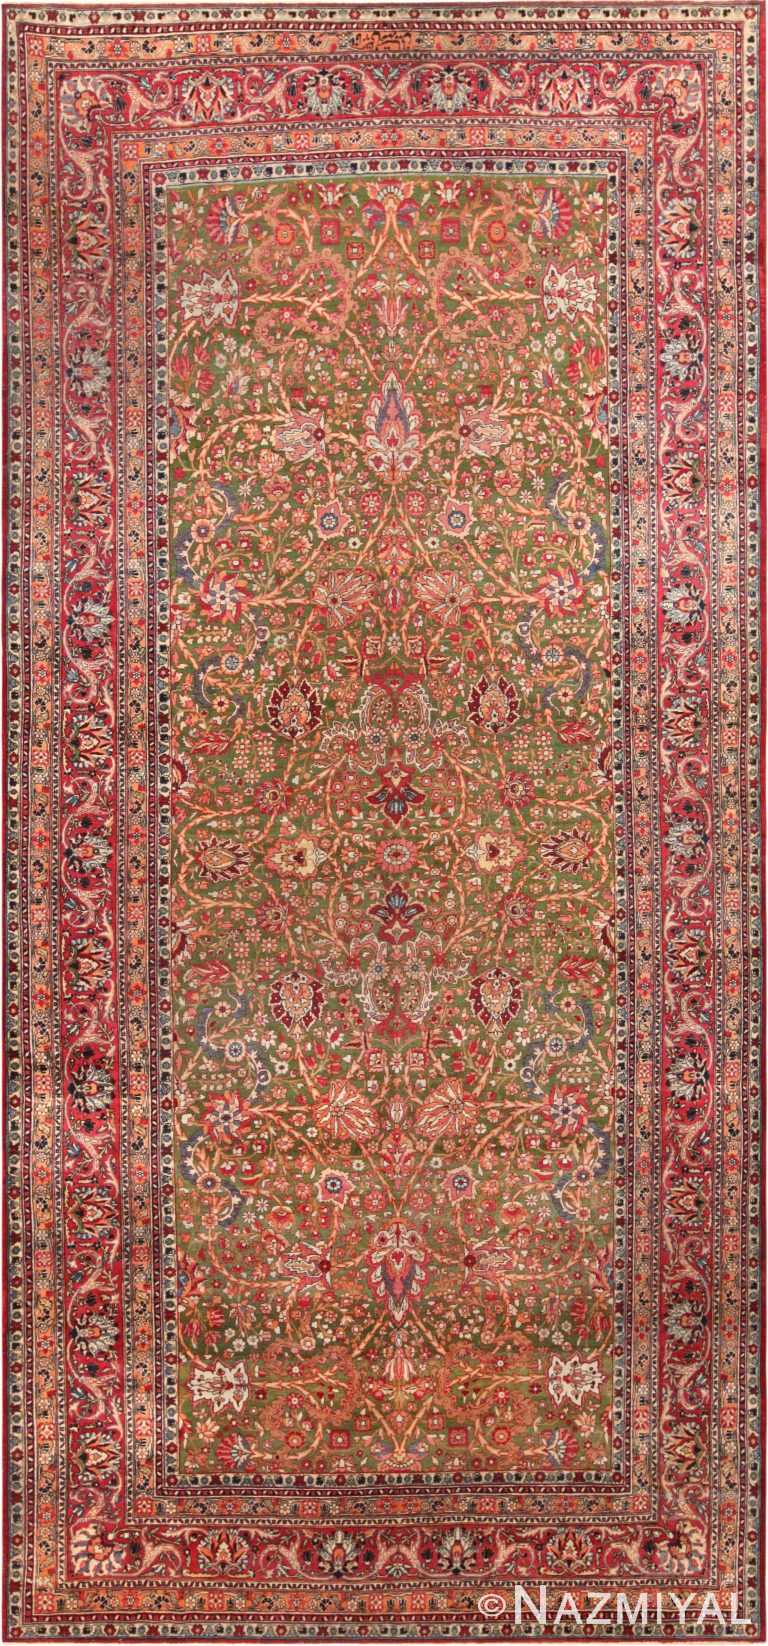 Gallery Size Antique Persian Tahran Rug 72247 by Nazmiyal Antique Rugs